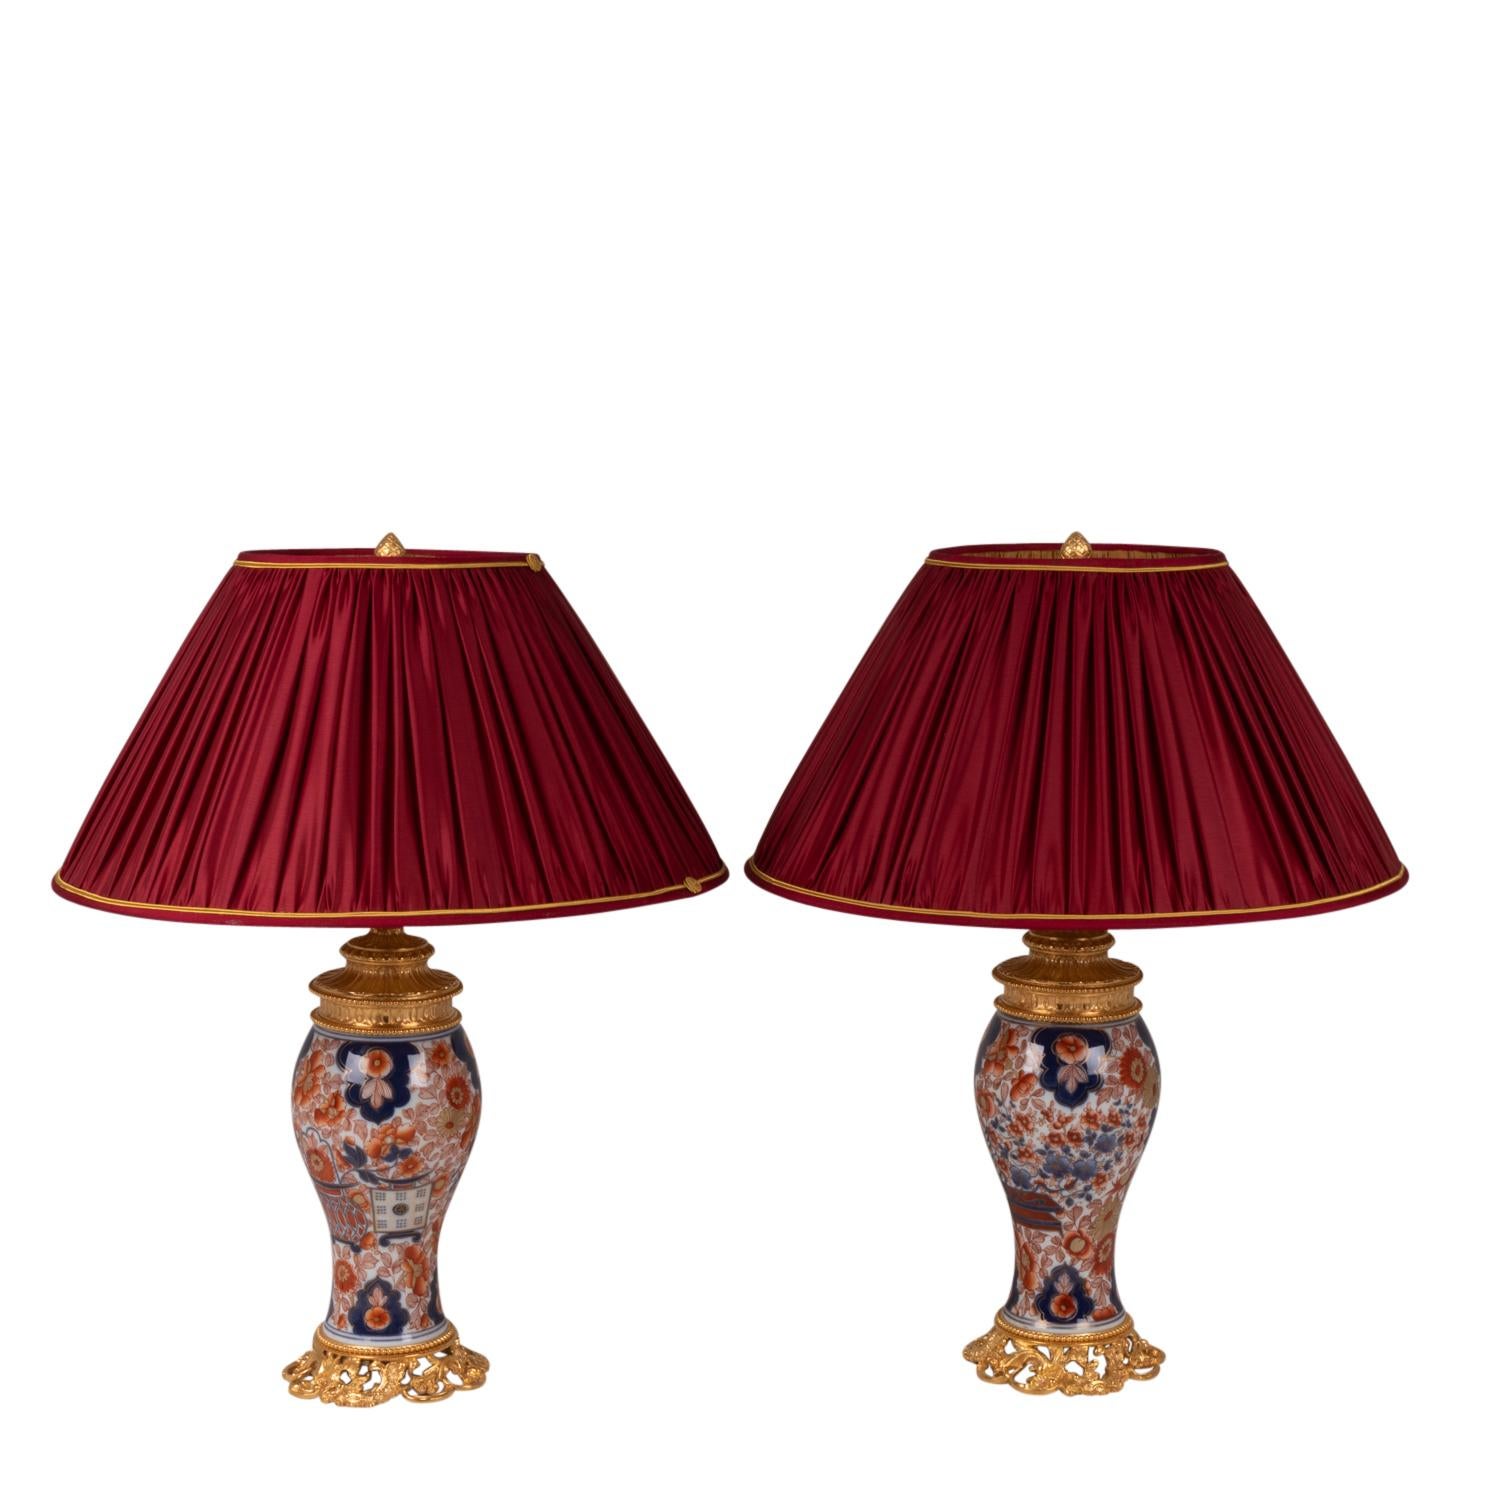 Pair of Bayeux porcelain and gilt bronze lamps. Base of the circular and openwork frame.

French work realized circa 1880.

New and functional electrical system!

The price indicated does not include that of the lampshade. However, our